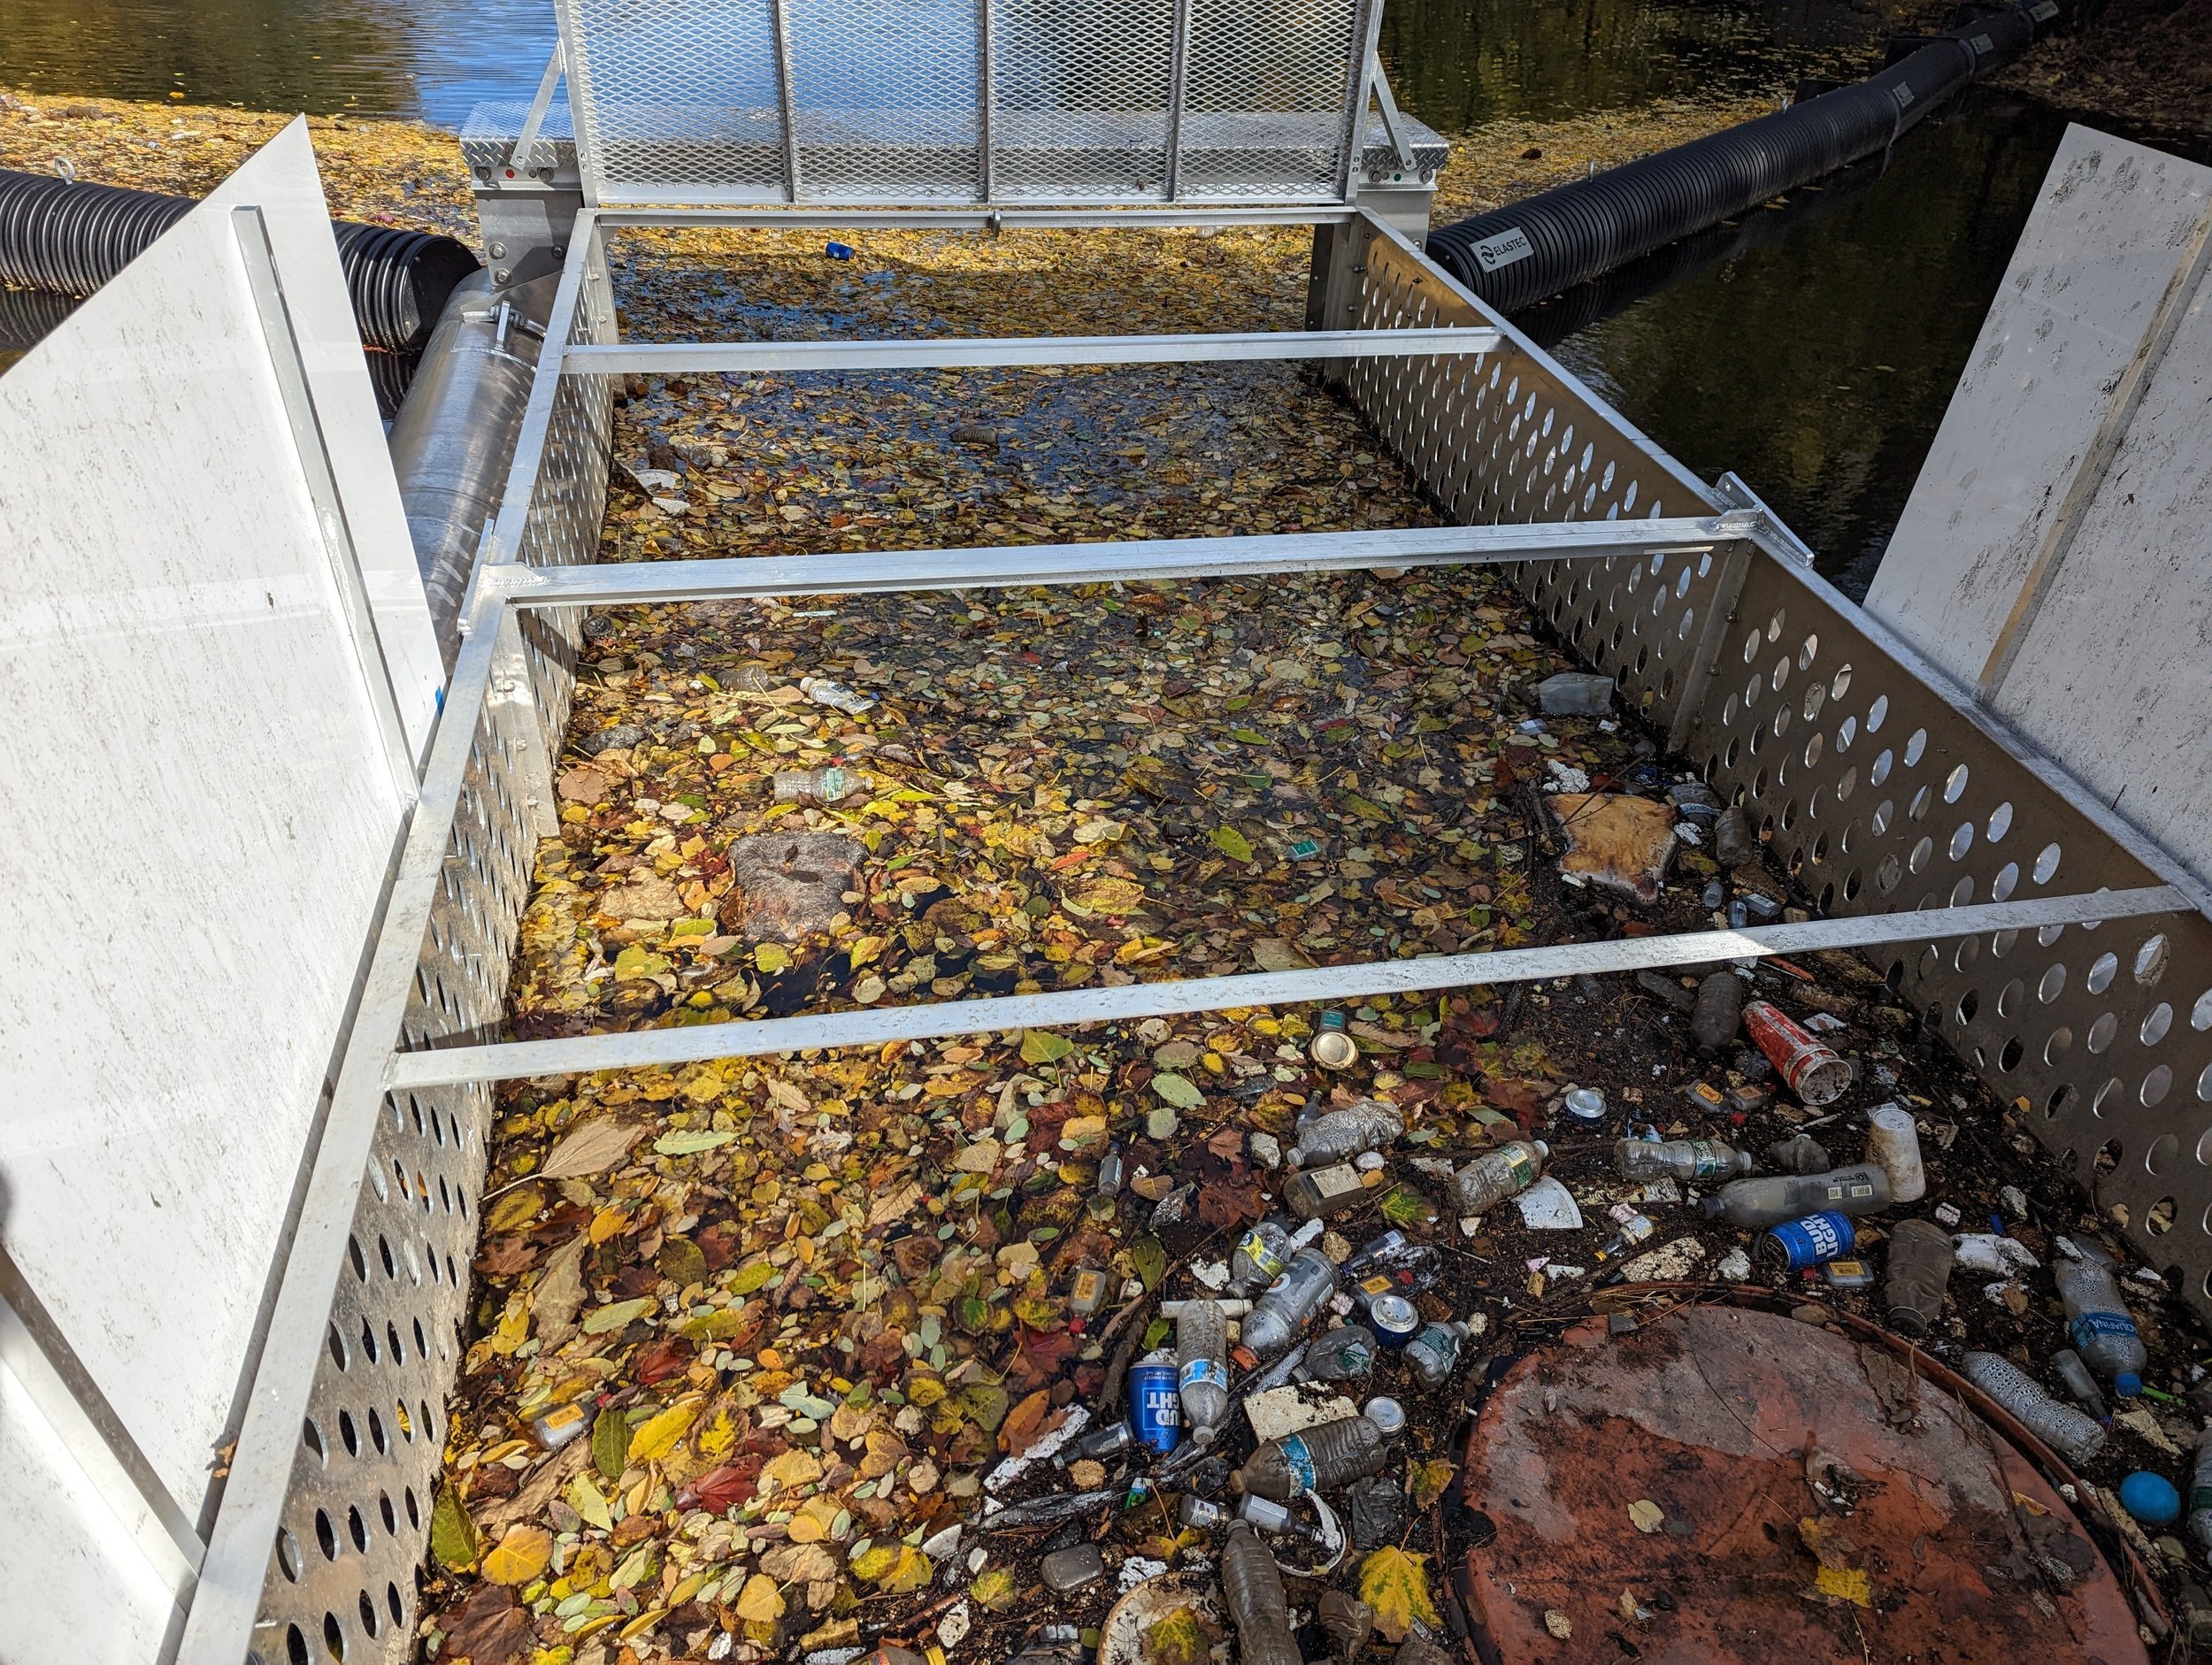  11.18.2022 | November marked the one-year anniversary of the  Malden Trash Trap . Over its first year, the trap stopped 142 lbs of trash from traveling down our waterways &amp; into the ocean! The most common items in the trap were plastic &amp; nip